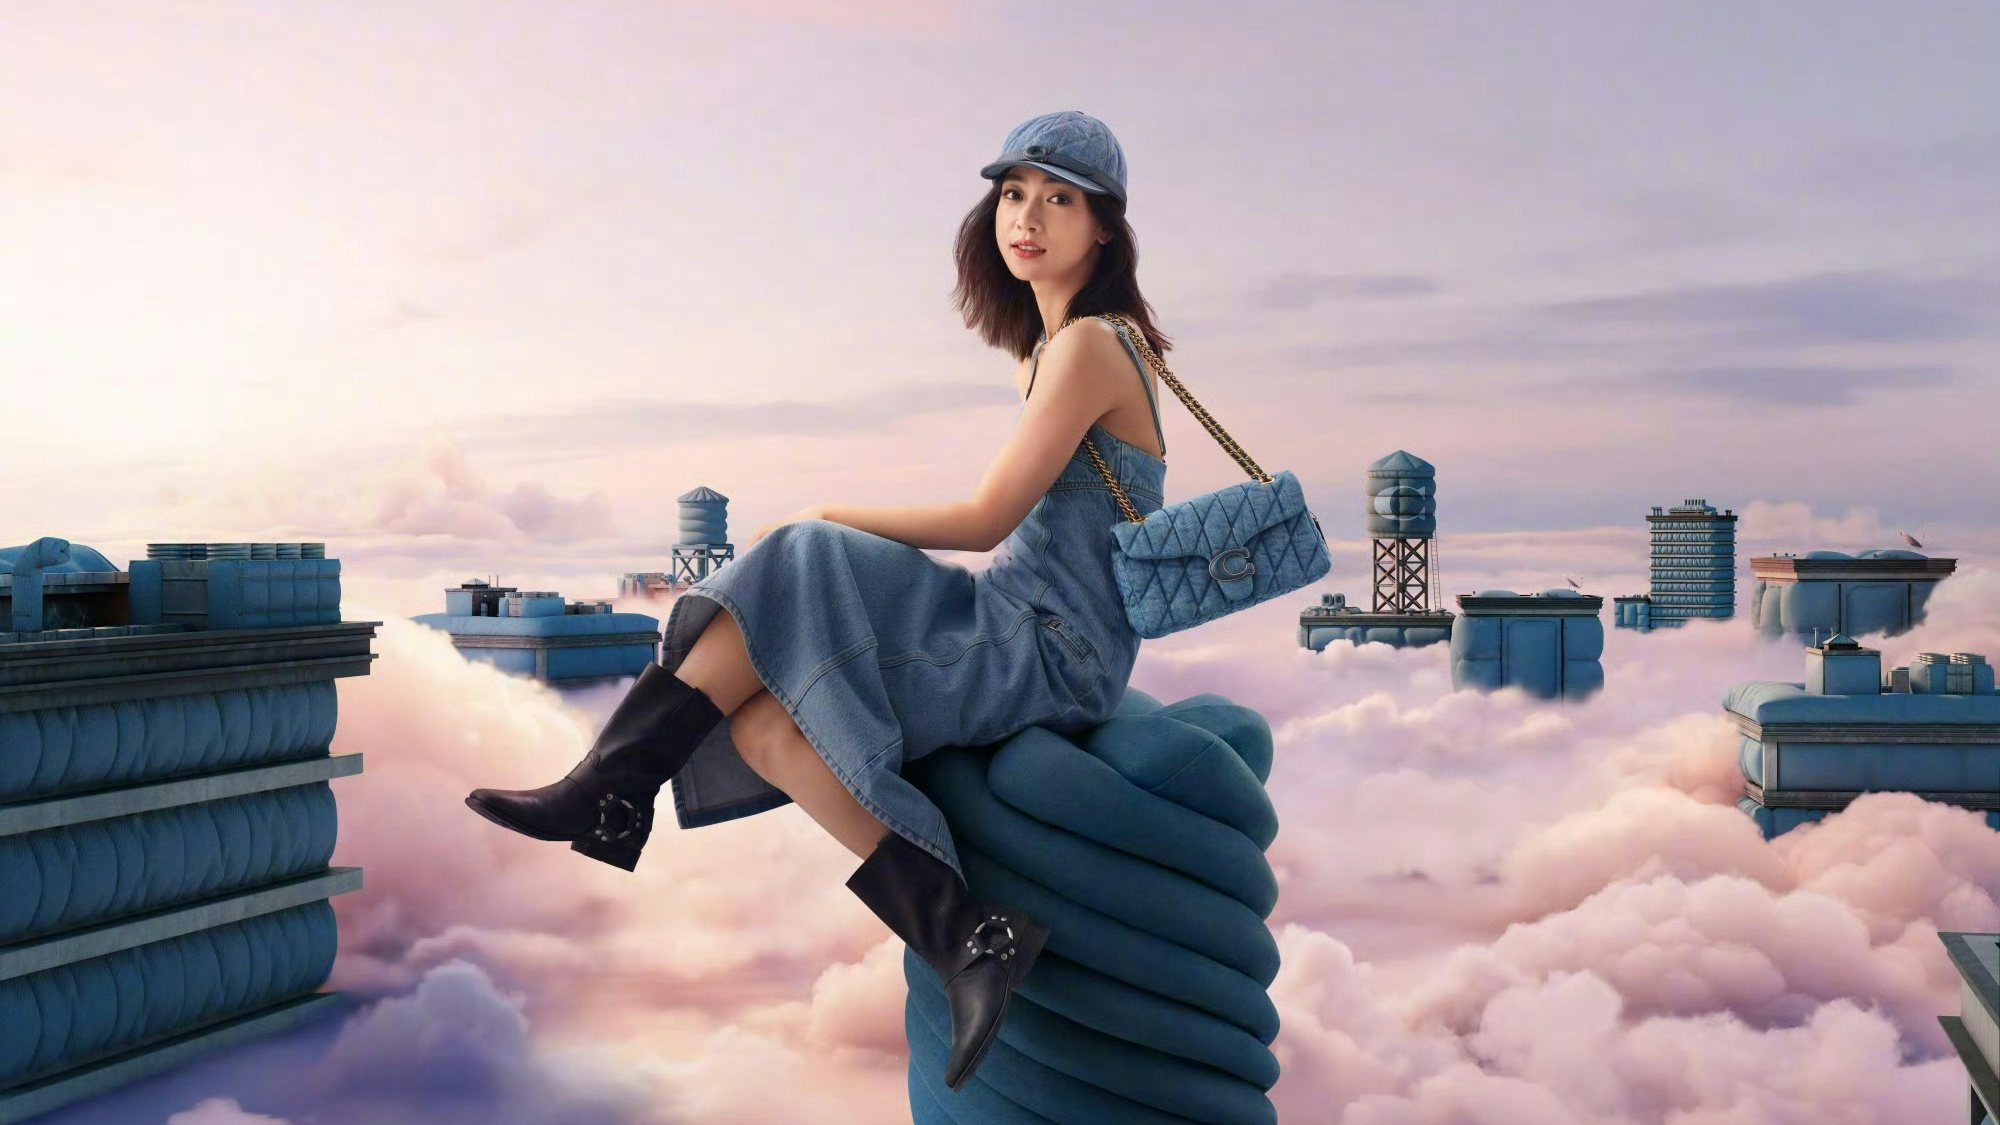 Chinese actress Wu Jinyan stars in Coach’s AI-inspired “Find Your Courage” campaign. Image: Coach